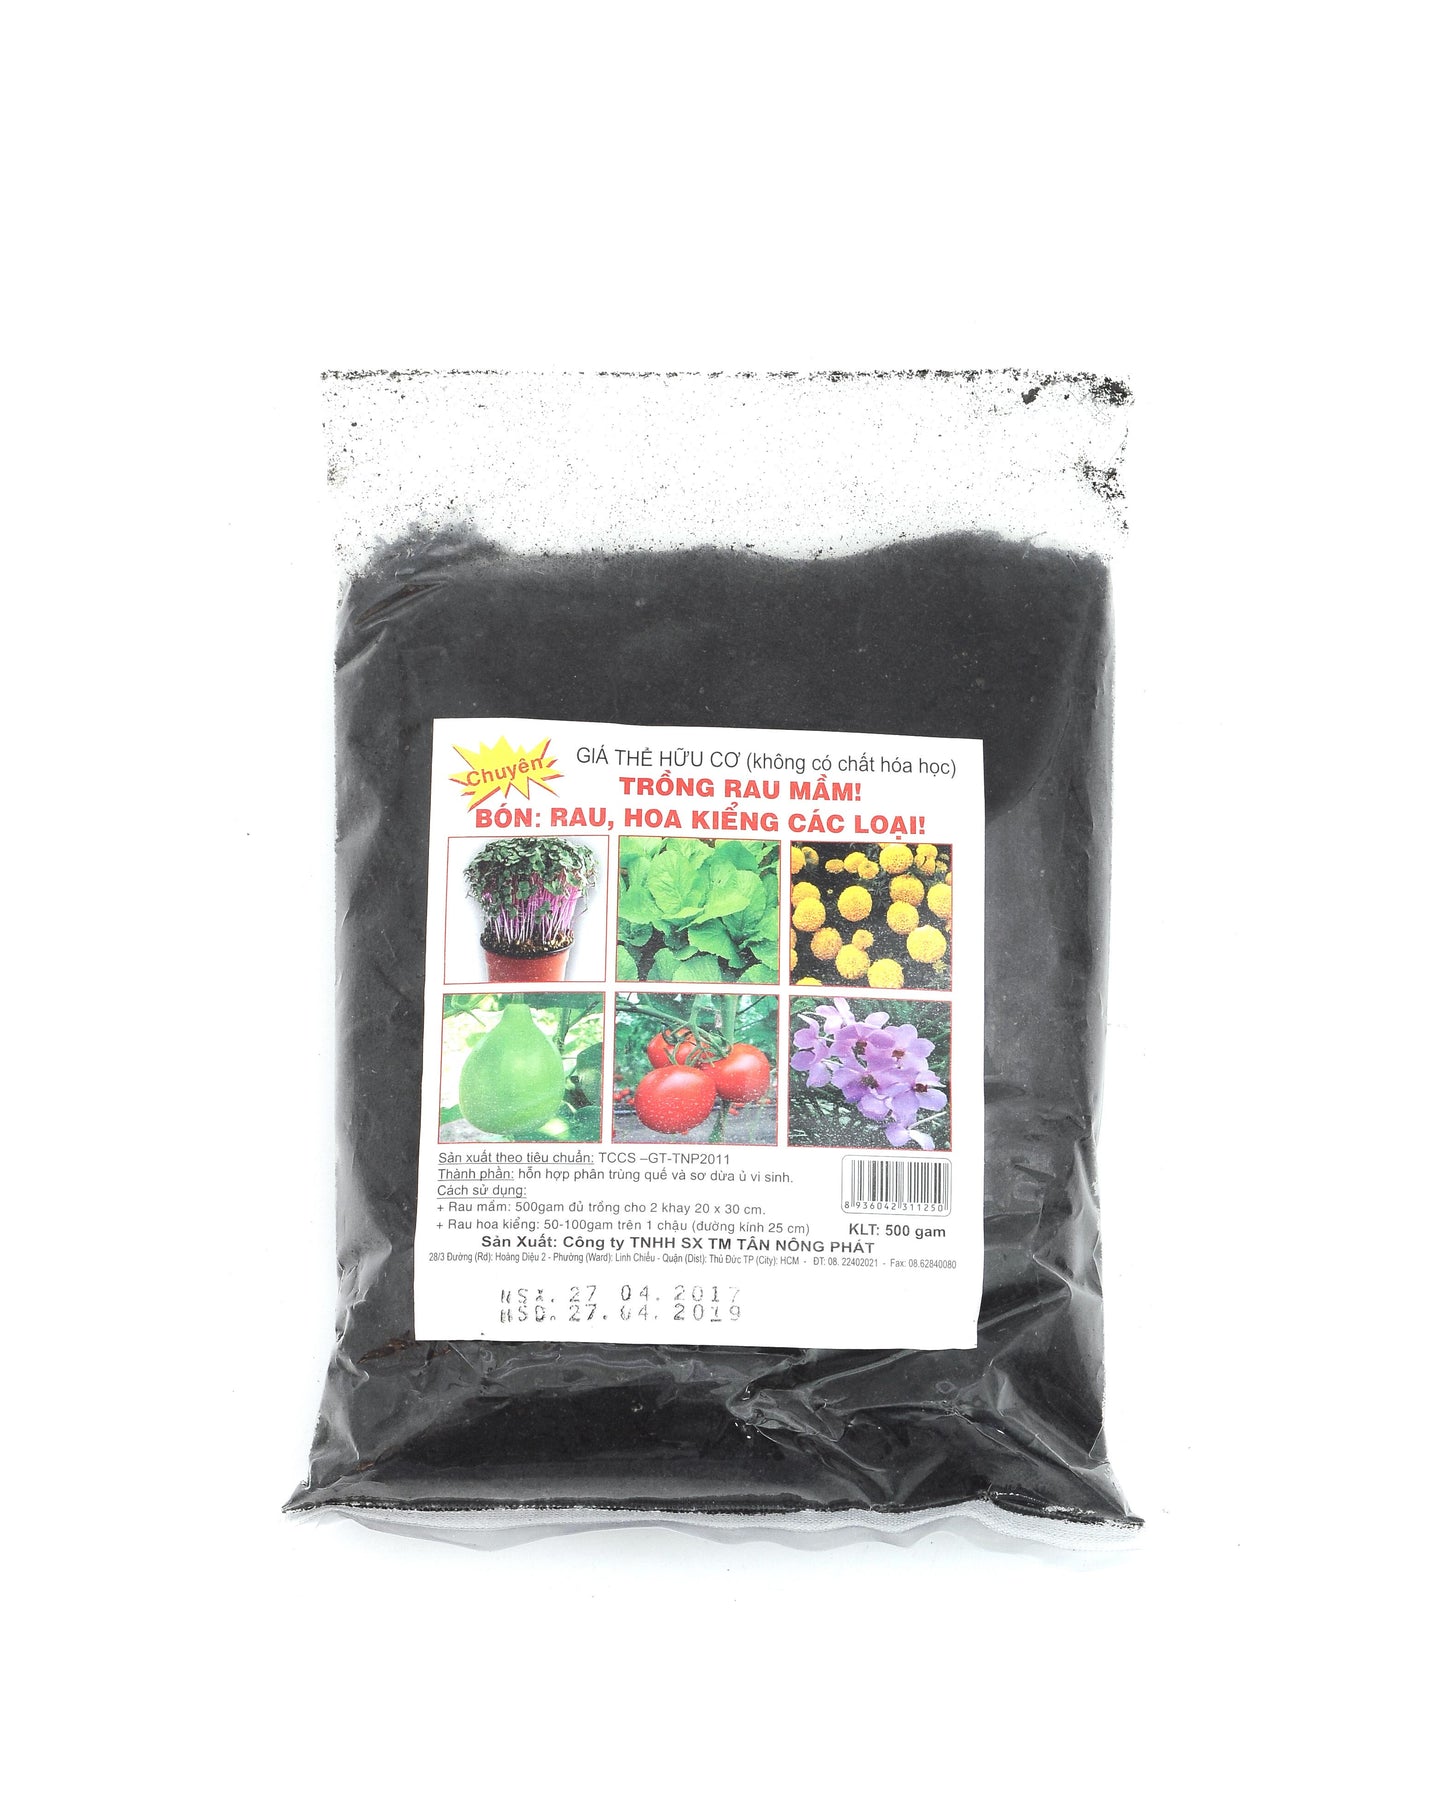 Organic Growing Mediums Used For Sprouts, Vegetables, Bonsai – No Chemicals Added